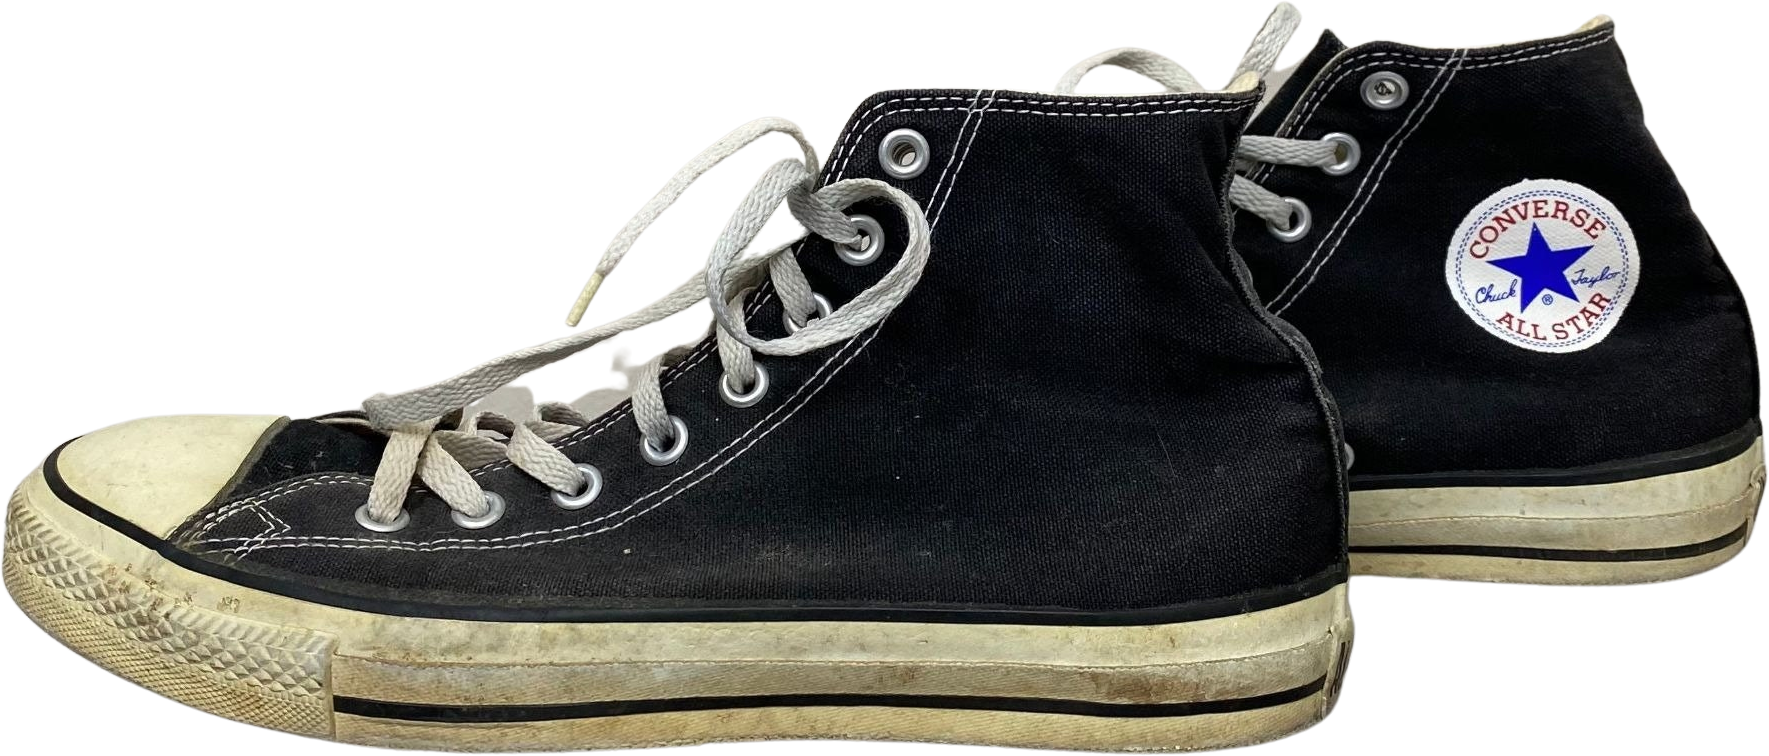 90s Converse All Stars Made In Usa Chuck Taylor Black High Top by Converse